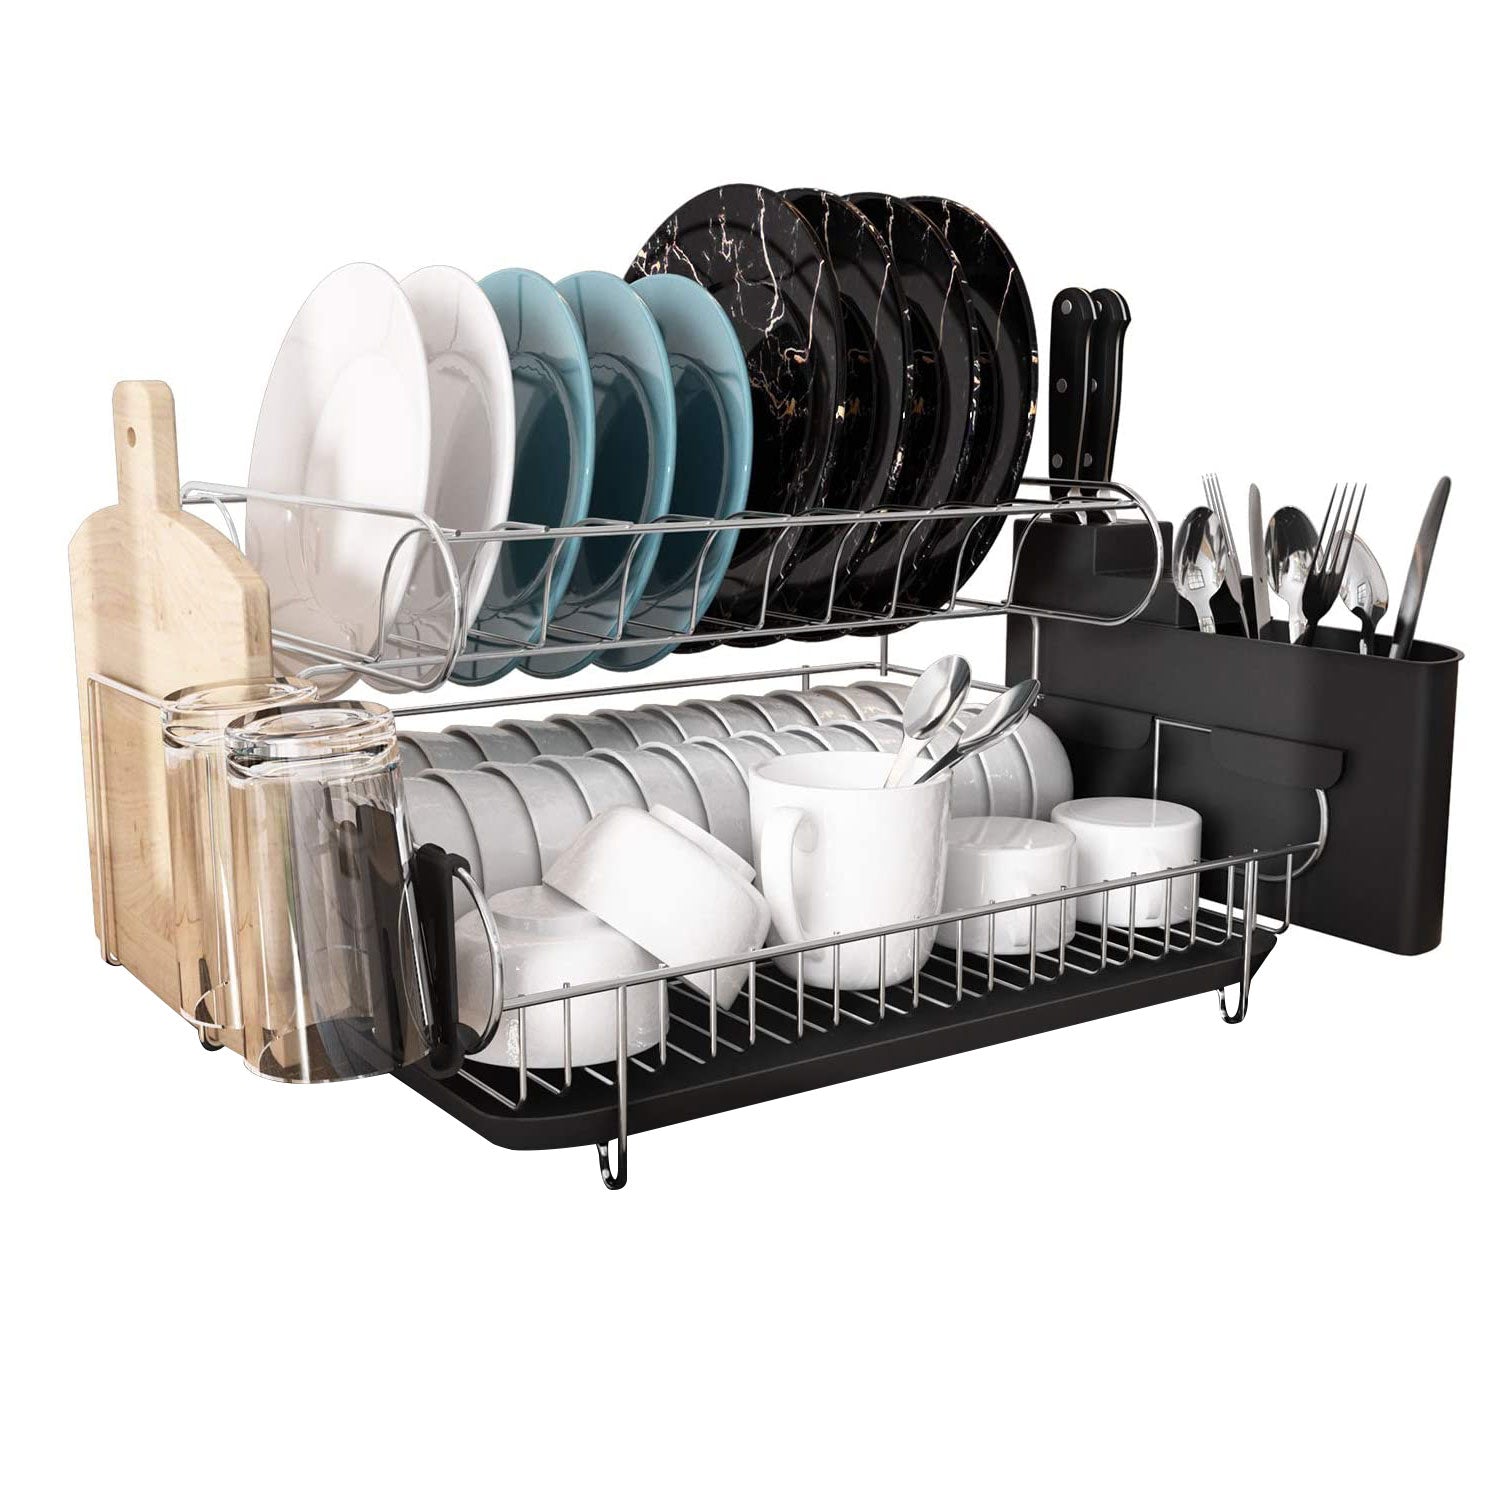 Over The Sink Dish Drying Rack, 2 Tiers Stainless Steel